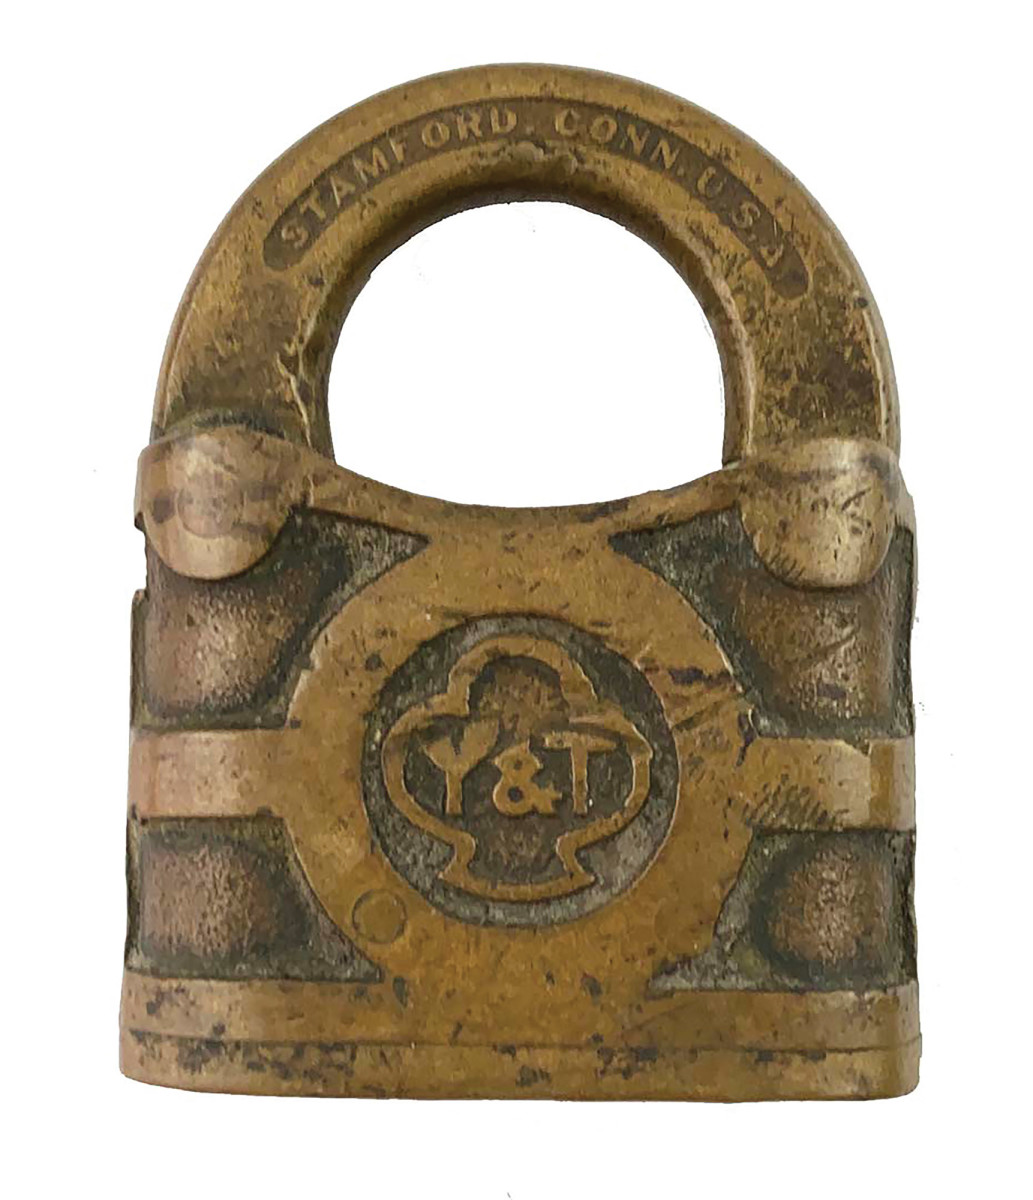 Antique bronze Padlock by Yale & Towne